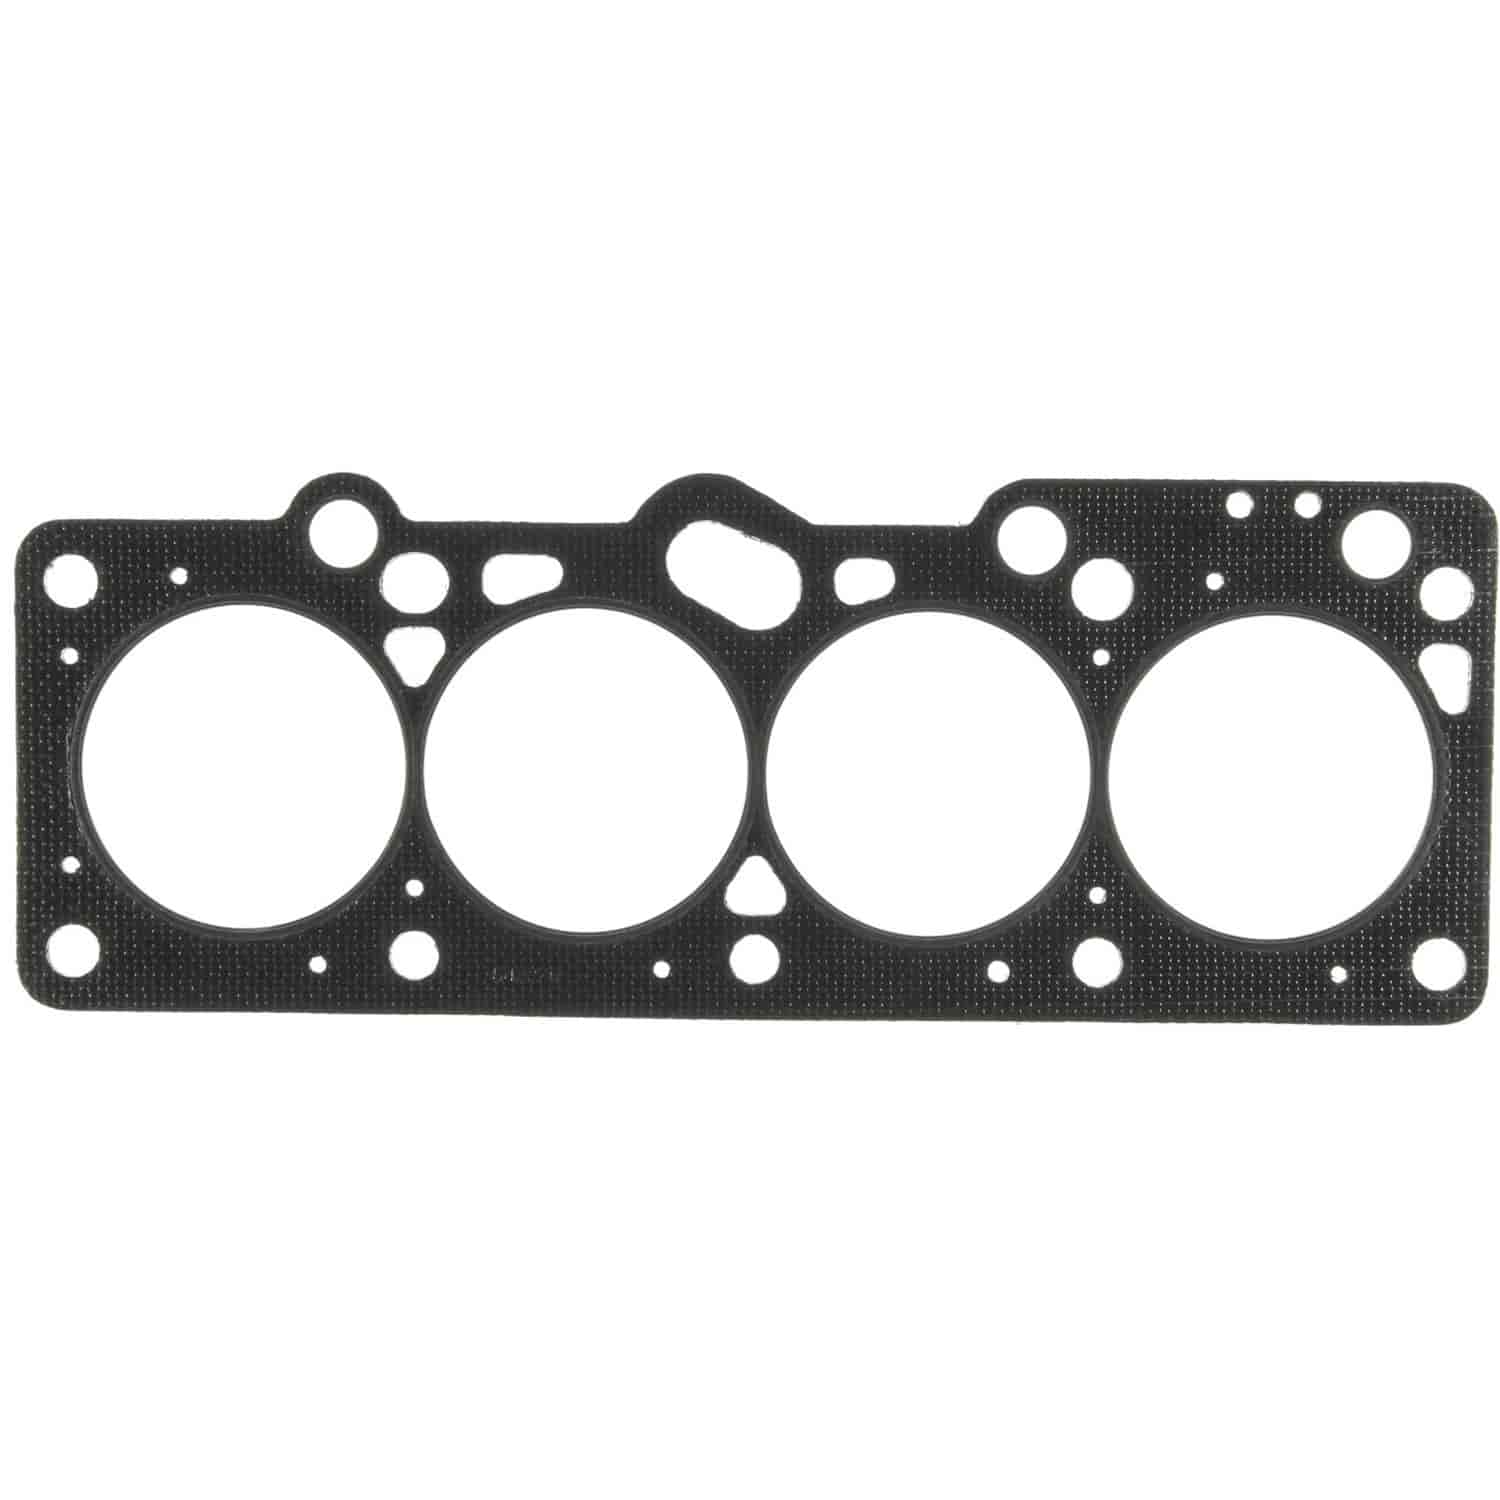 Cylinder Head Gasket Ford Products 4 2.0L SOHC Escort & Tracer 1997-1999.Head Bolts not